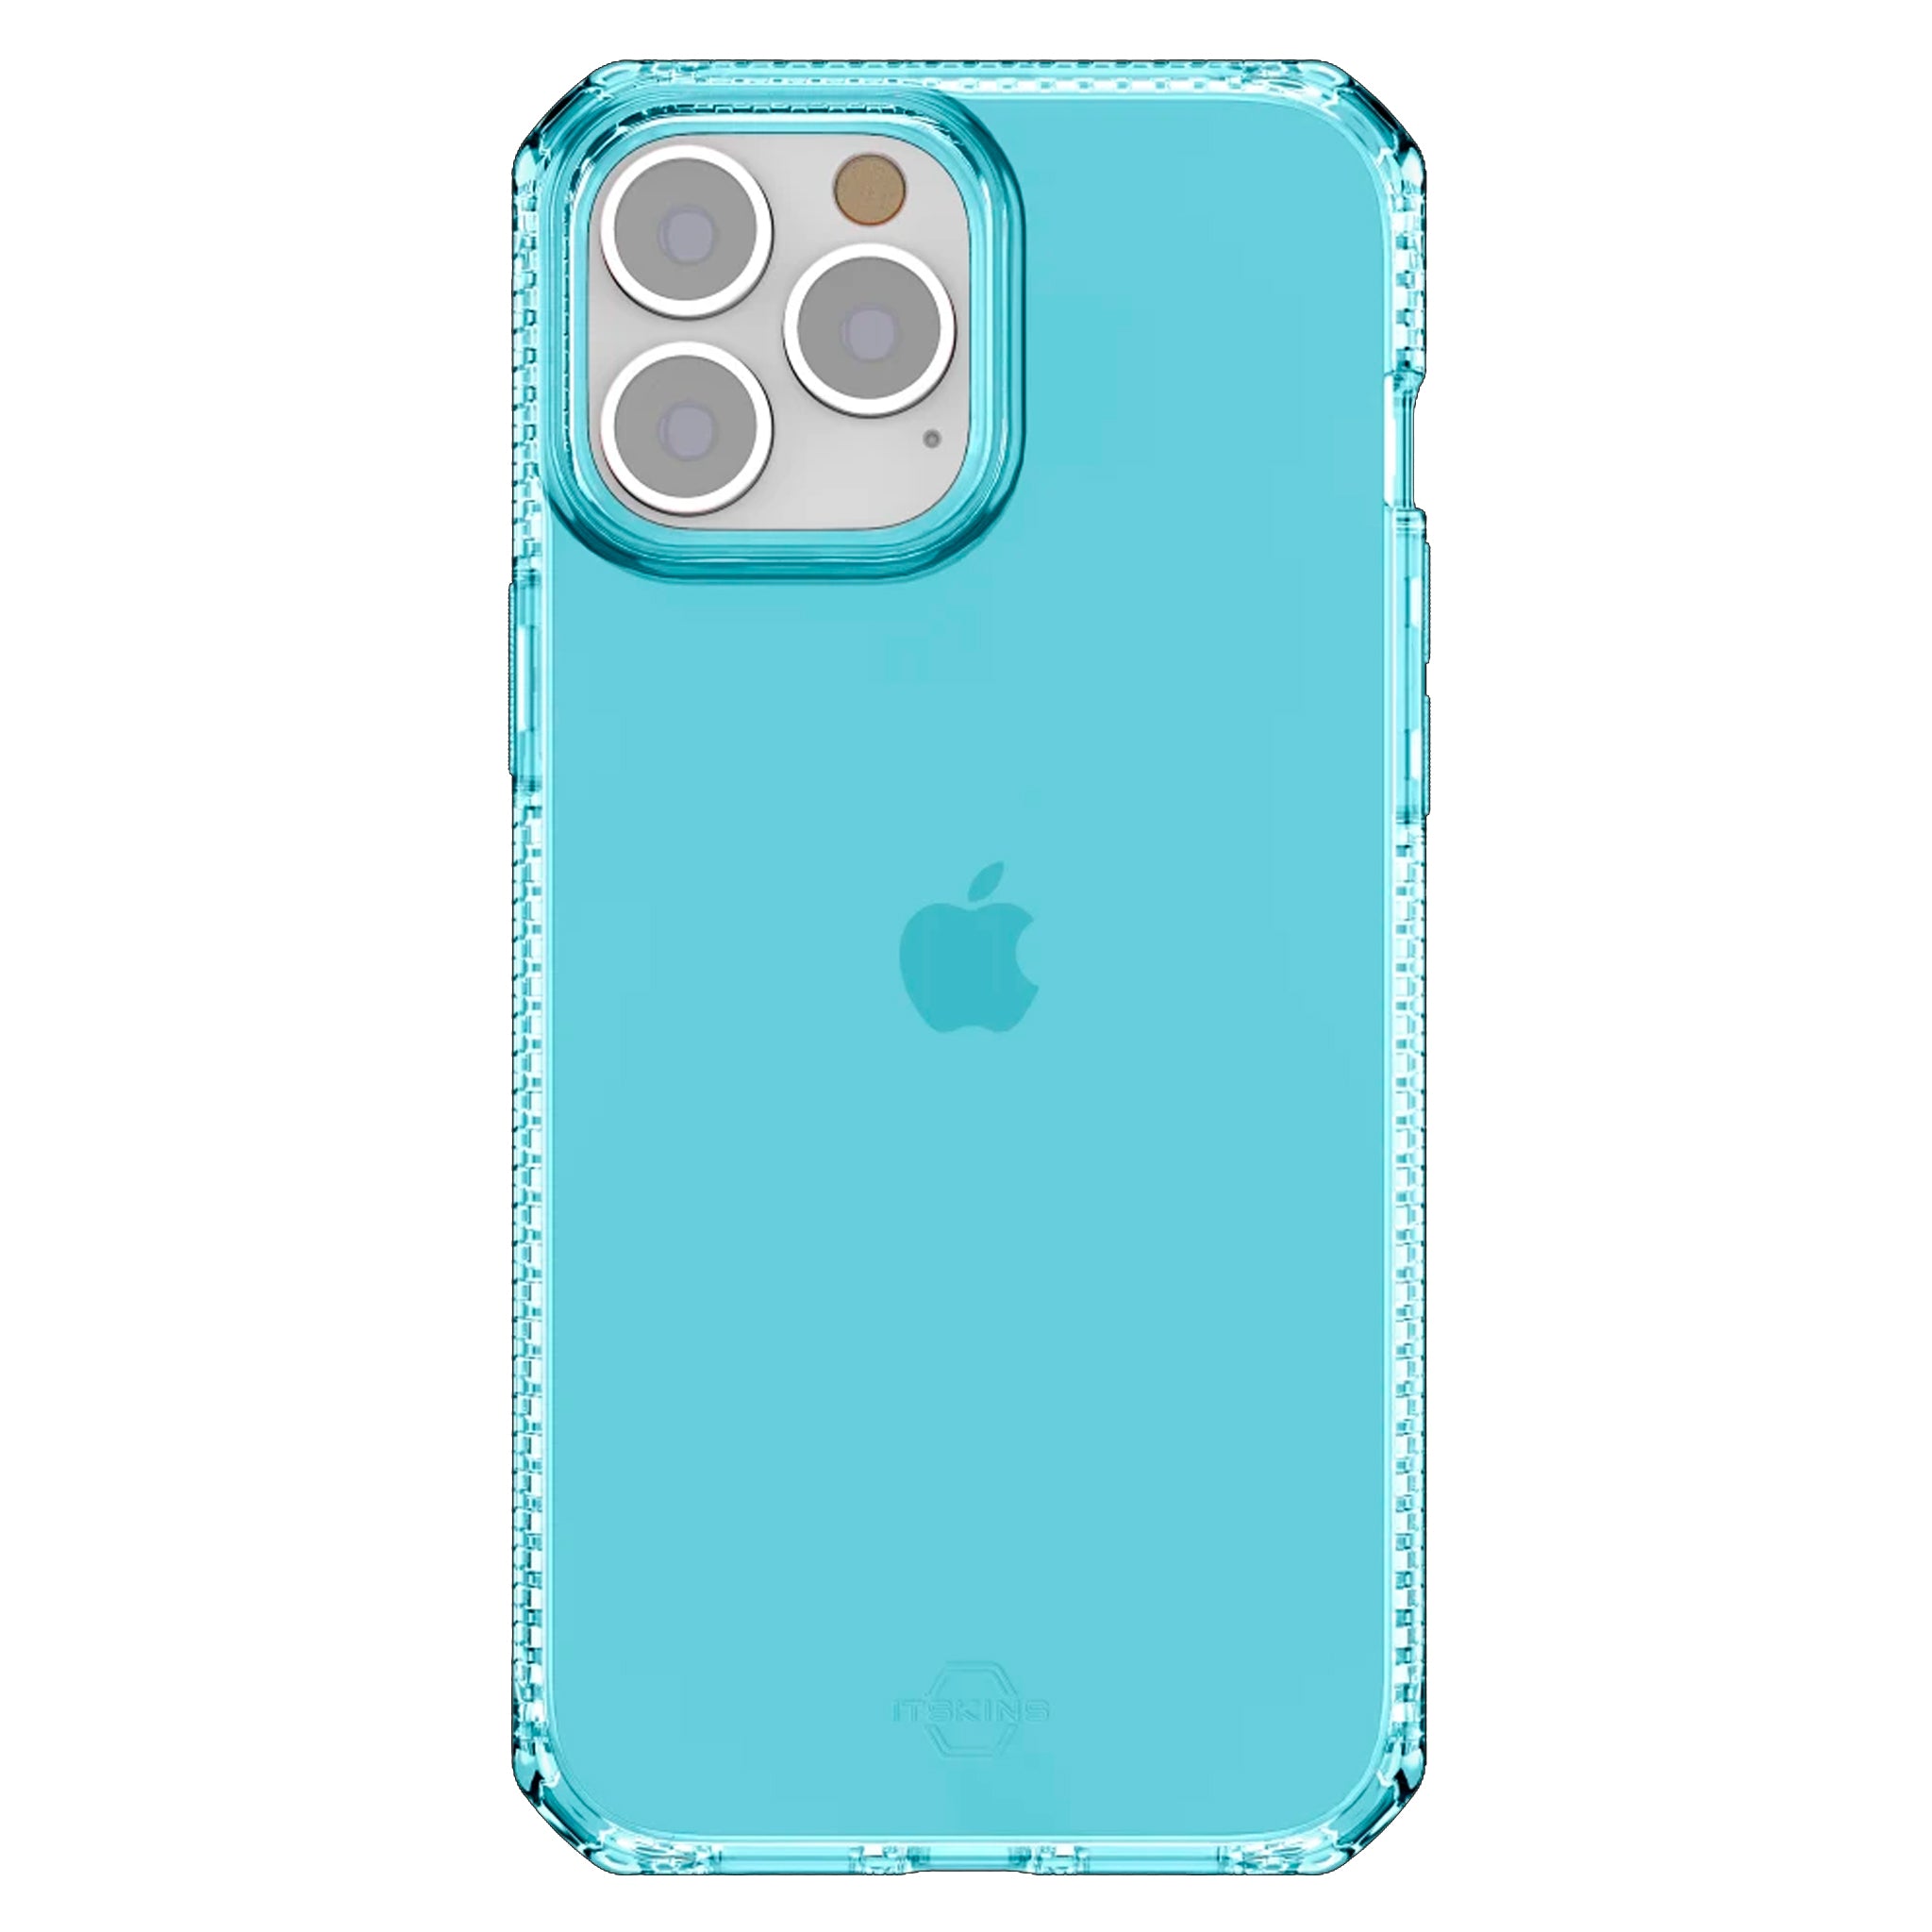 Itskins - Spectrum Clear Case For Apple Iphone 13 Pro Max / 12 Pro Max - Light Blue